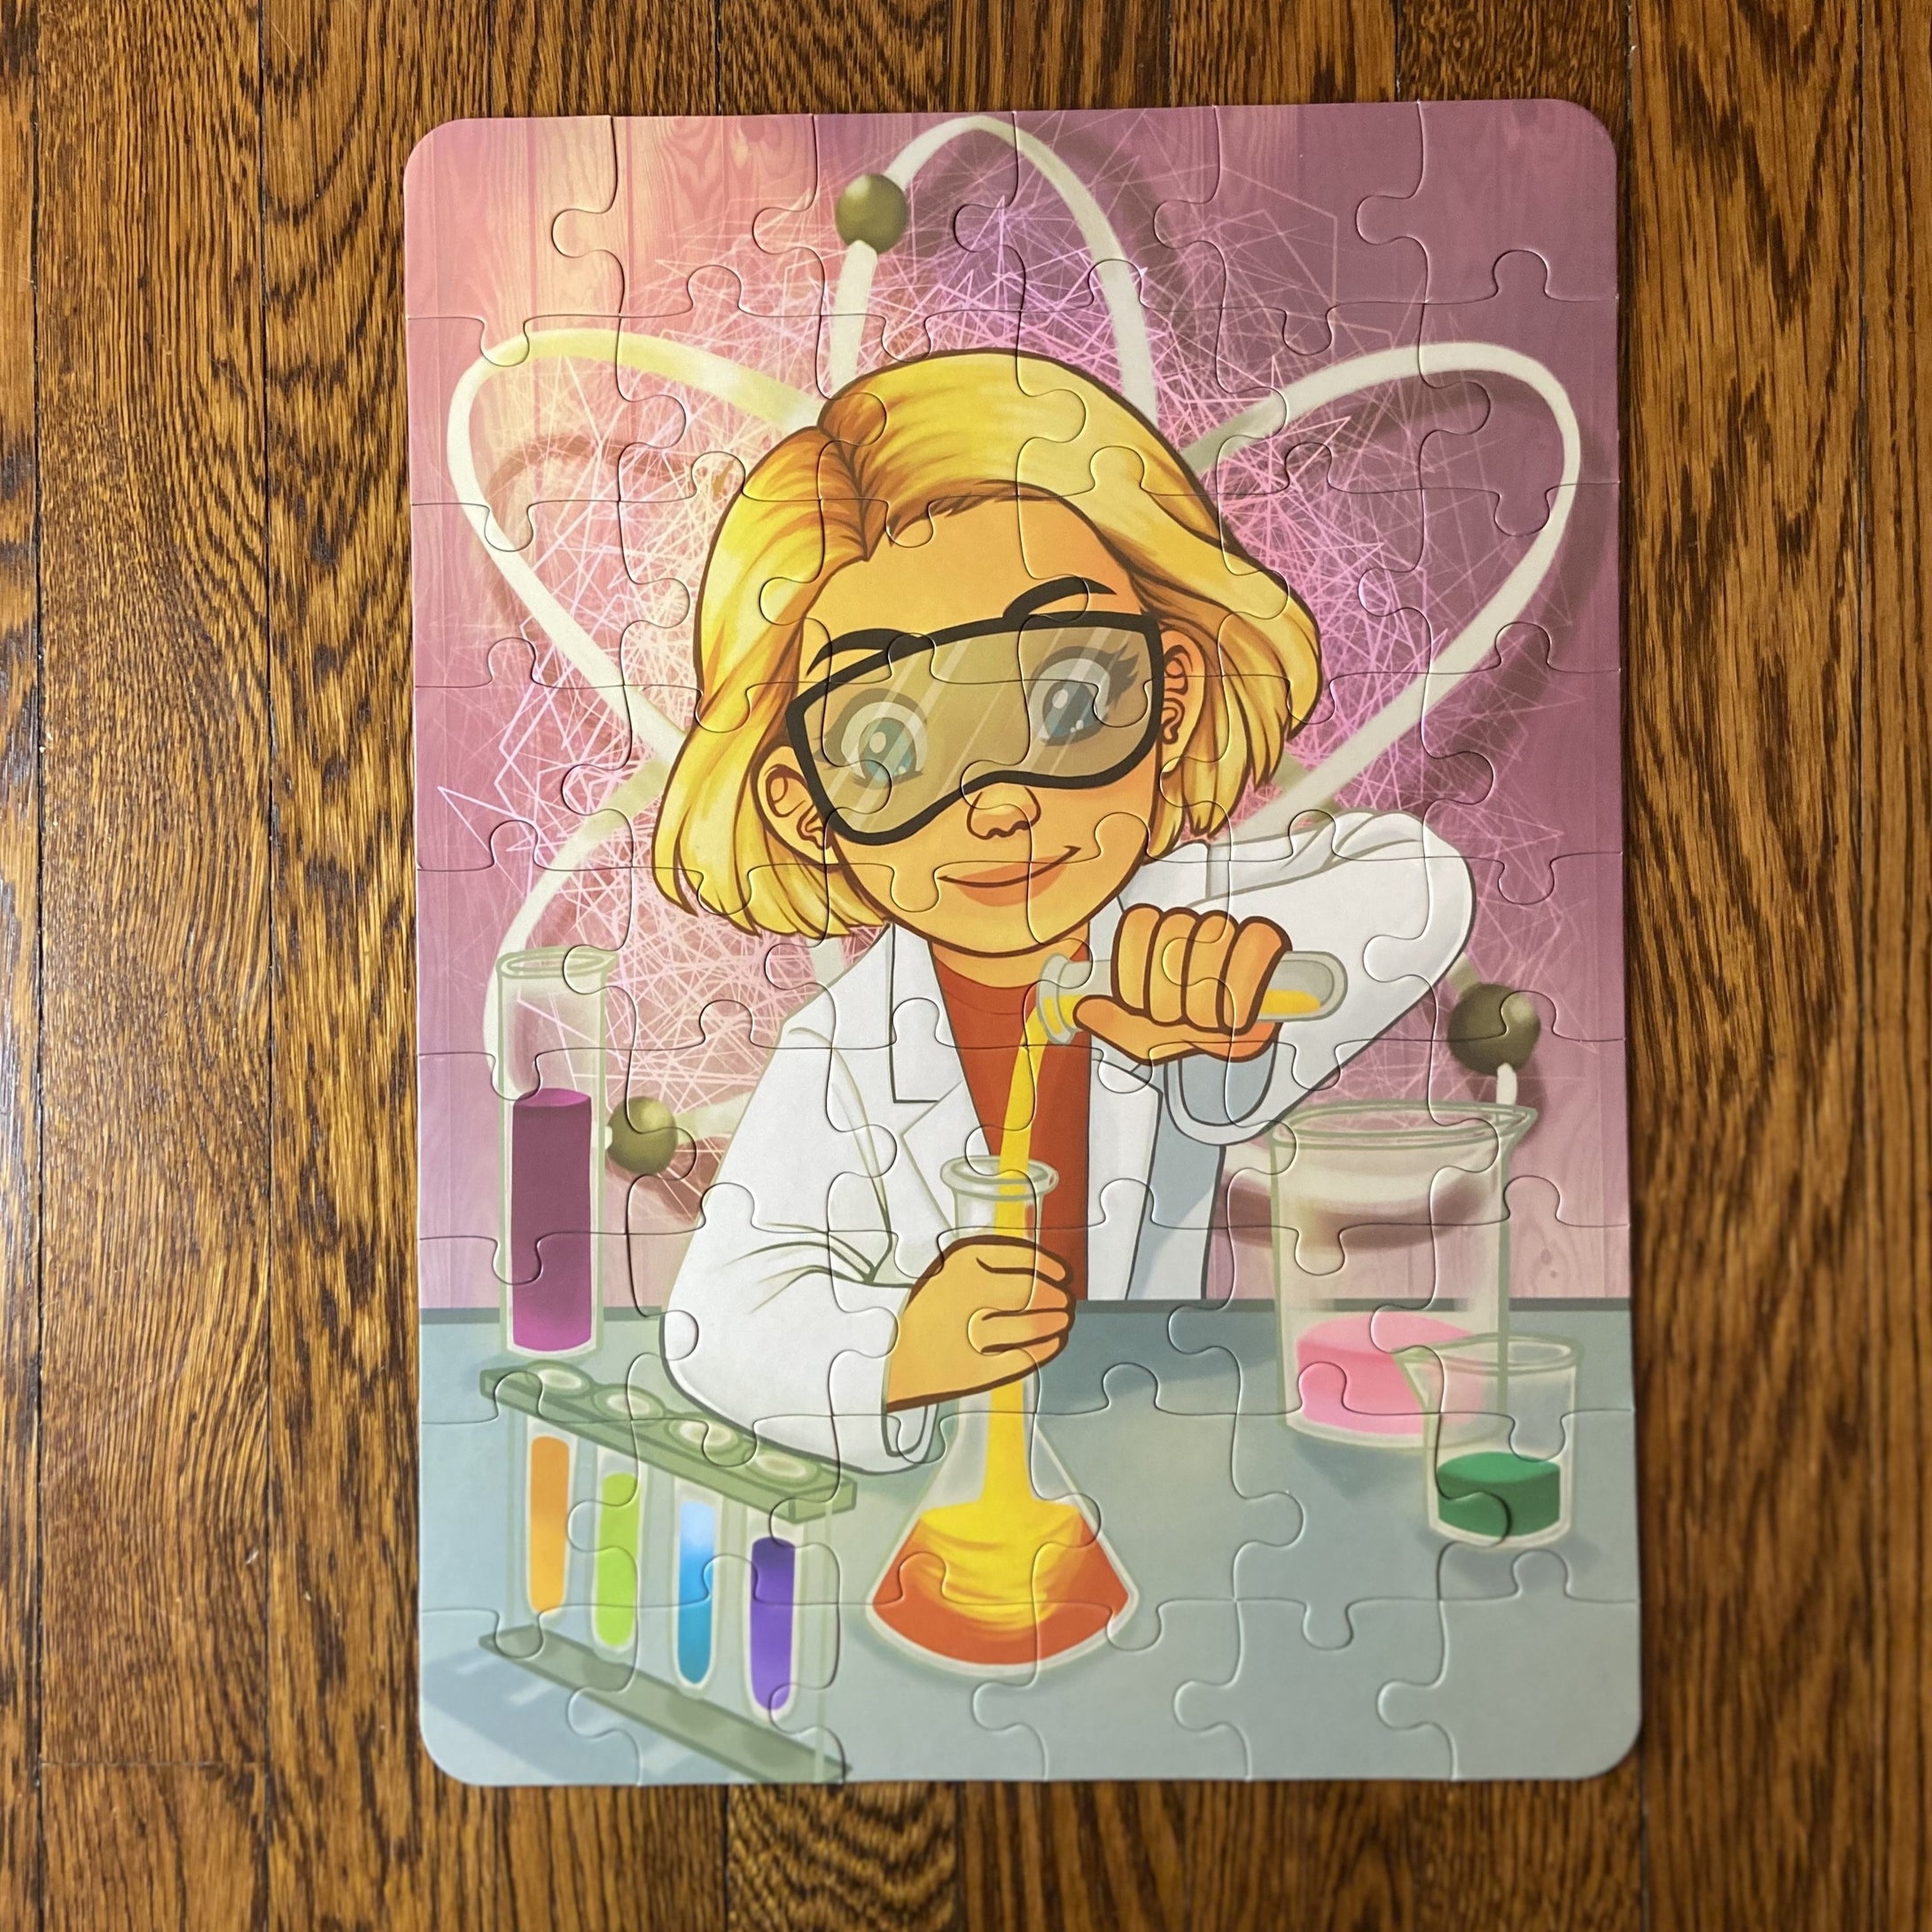 Science Laboratory (12in x 16.5in w/54 pieces)